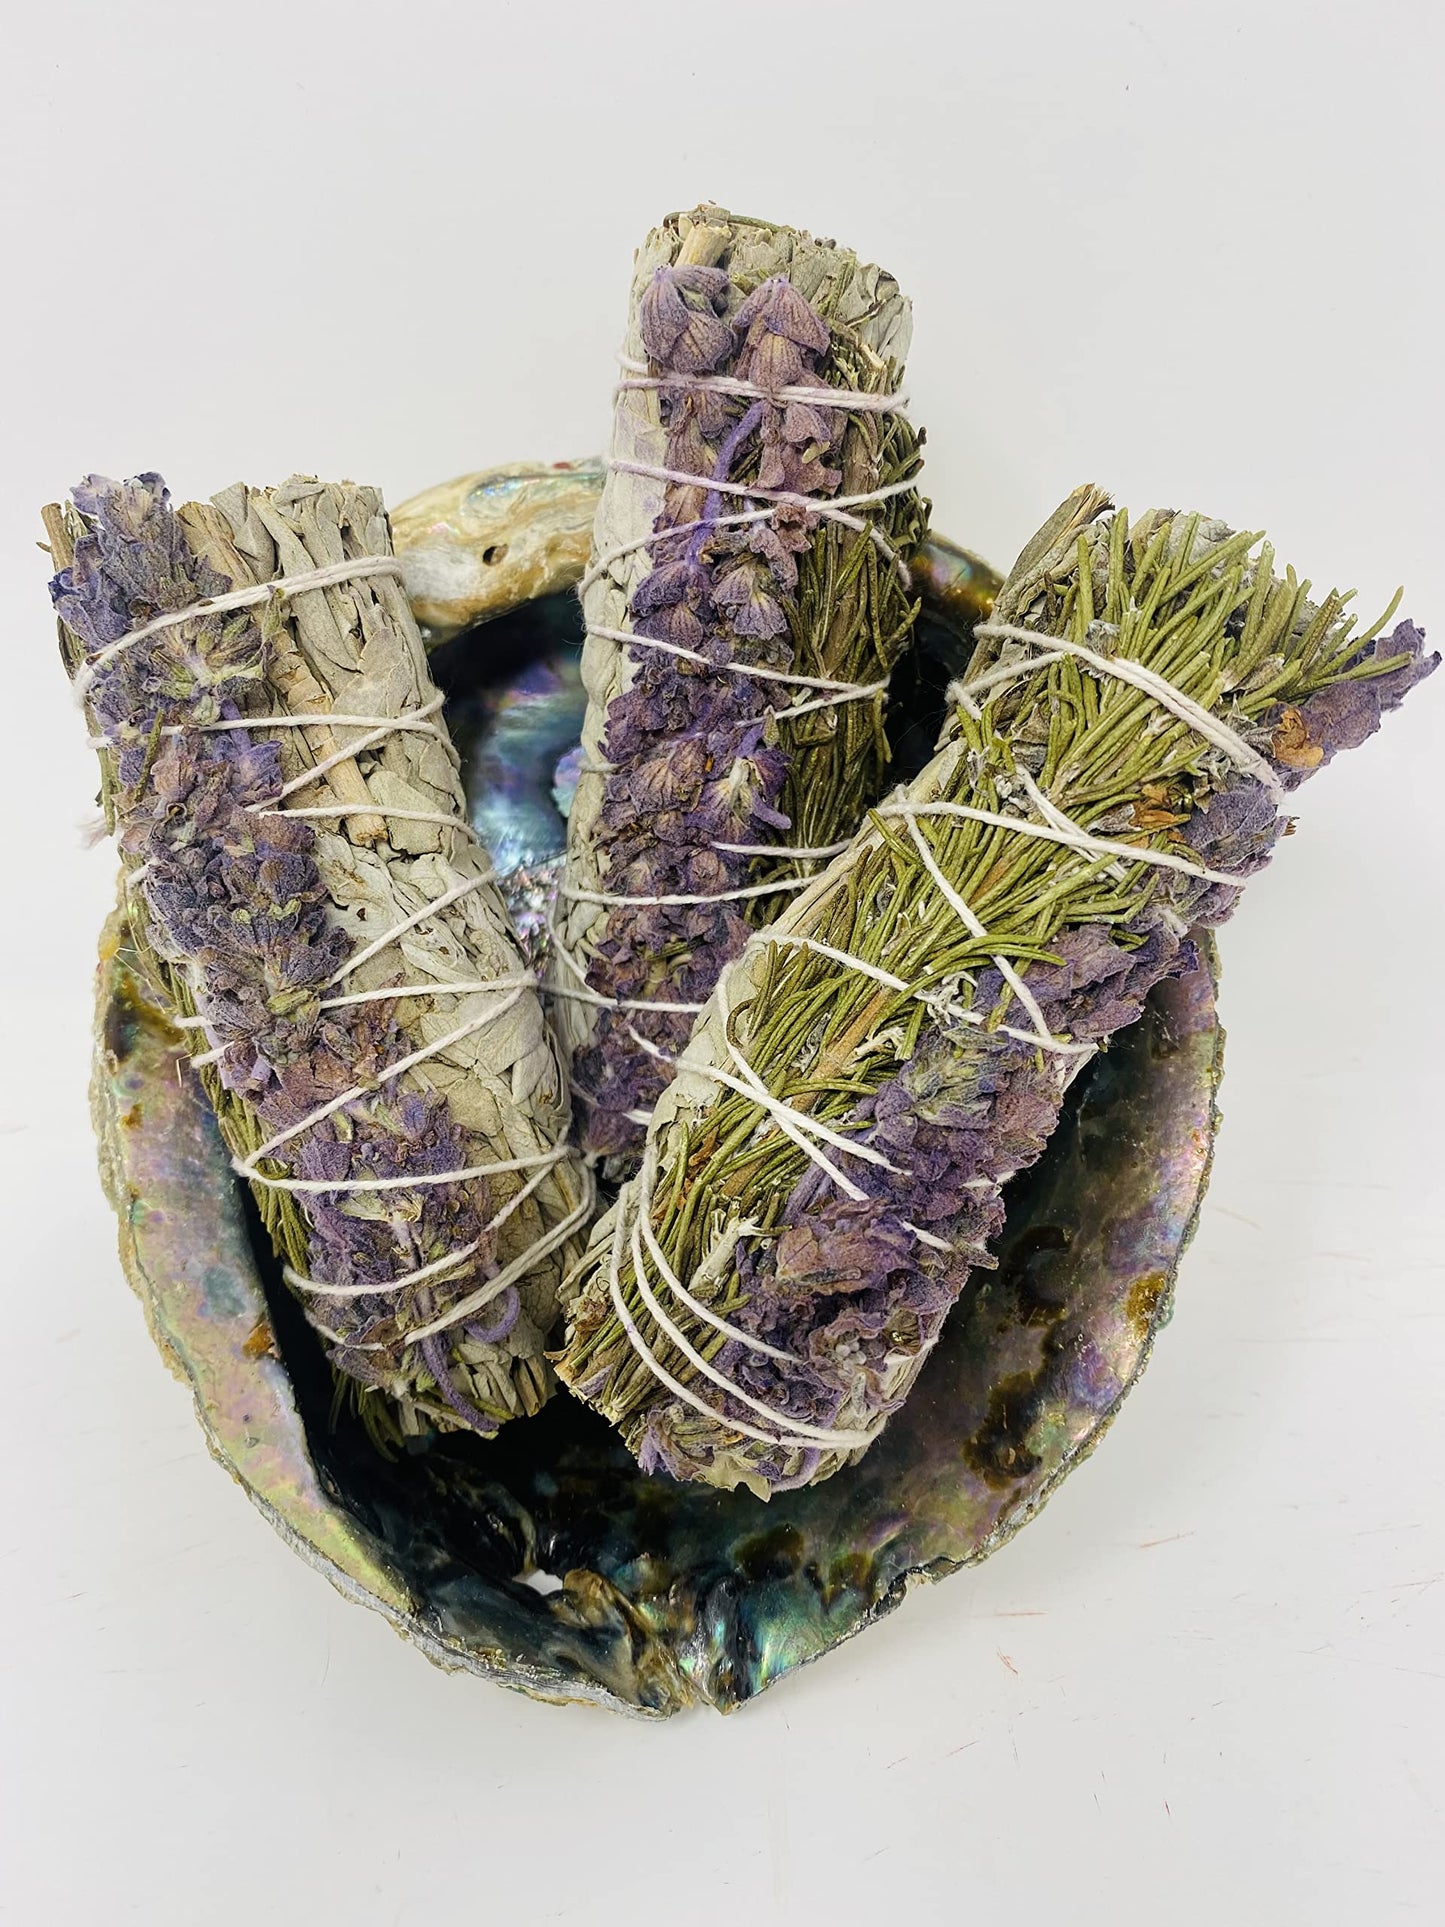 Sage Rosemary and Lavender Smudge Sticks